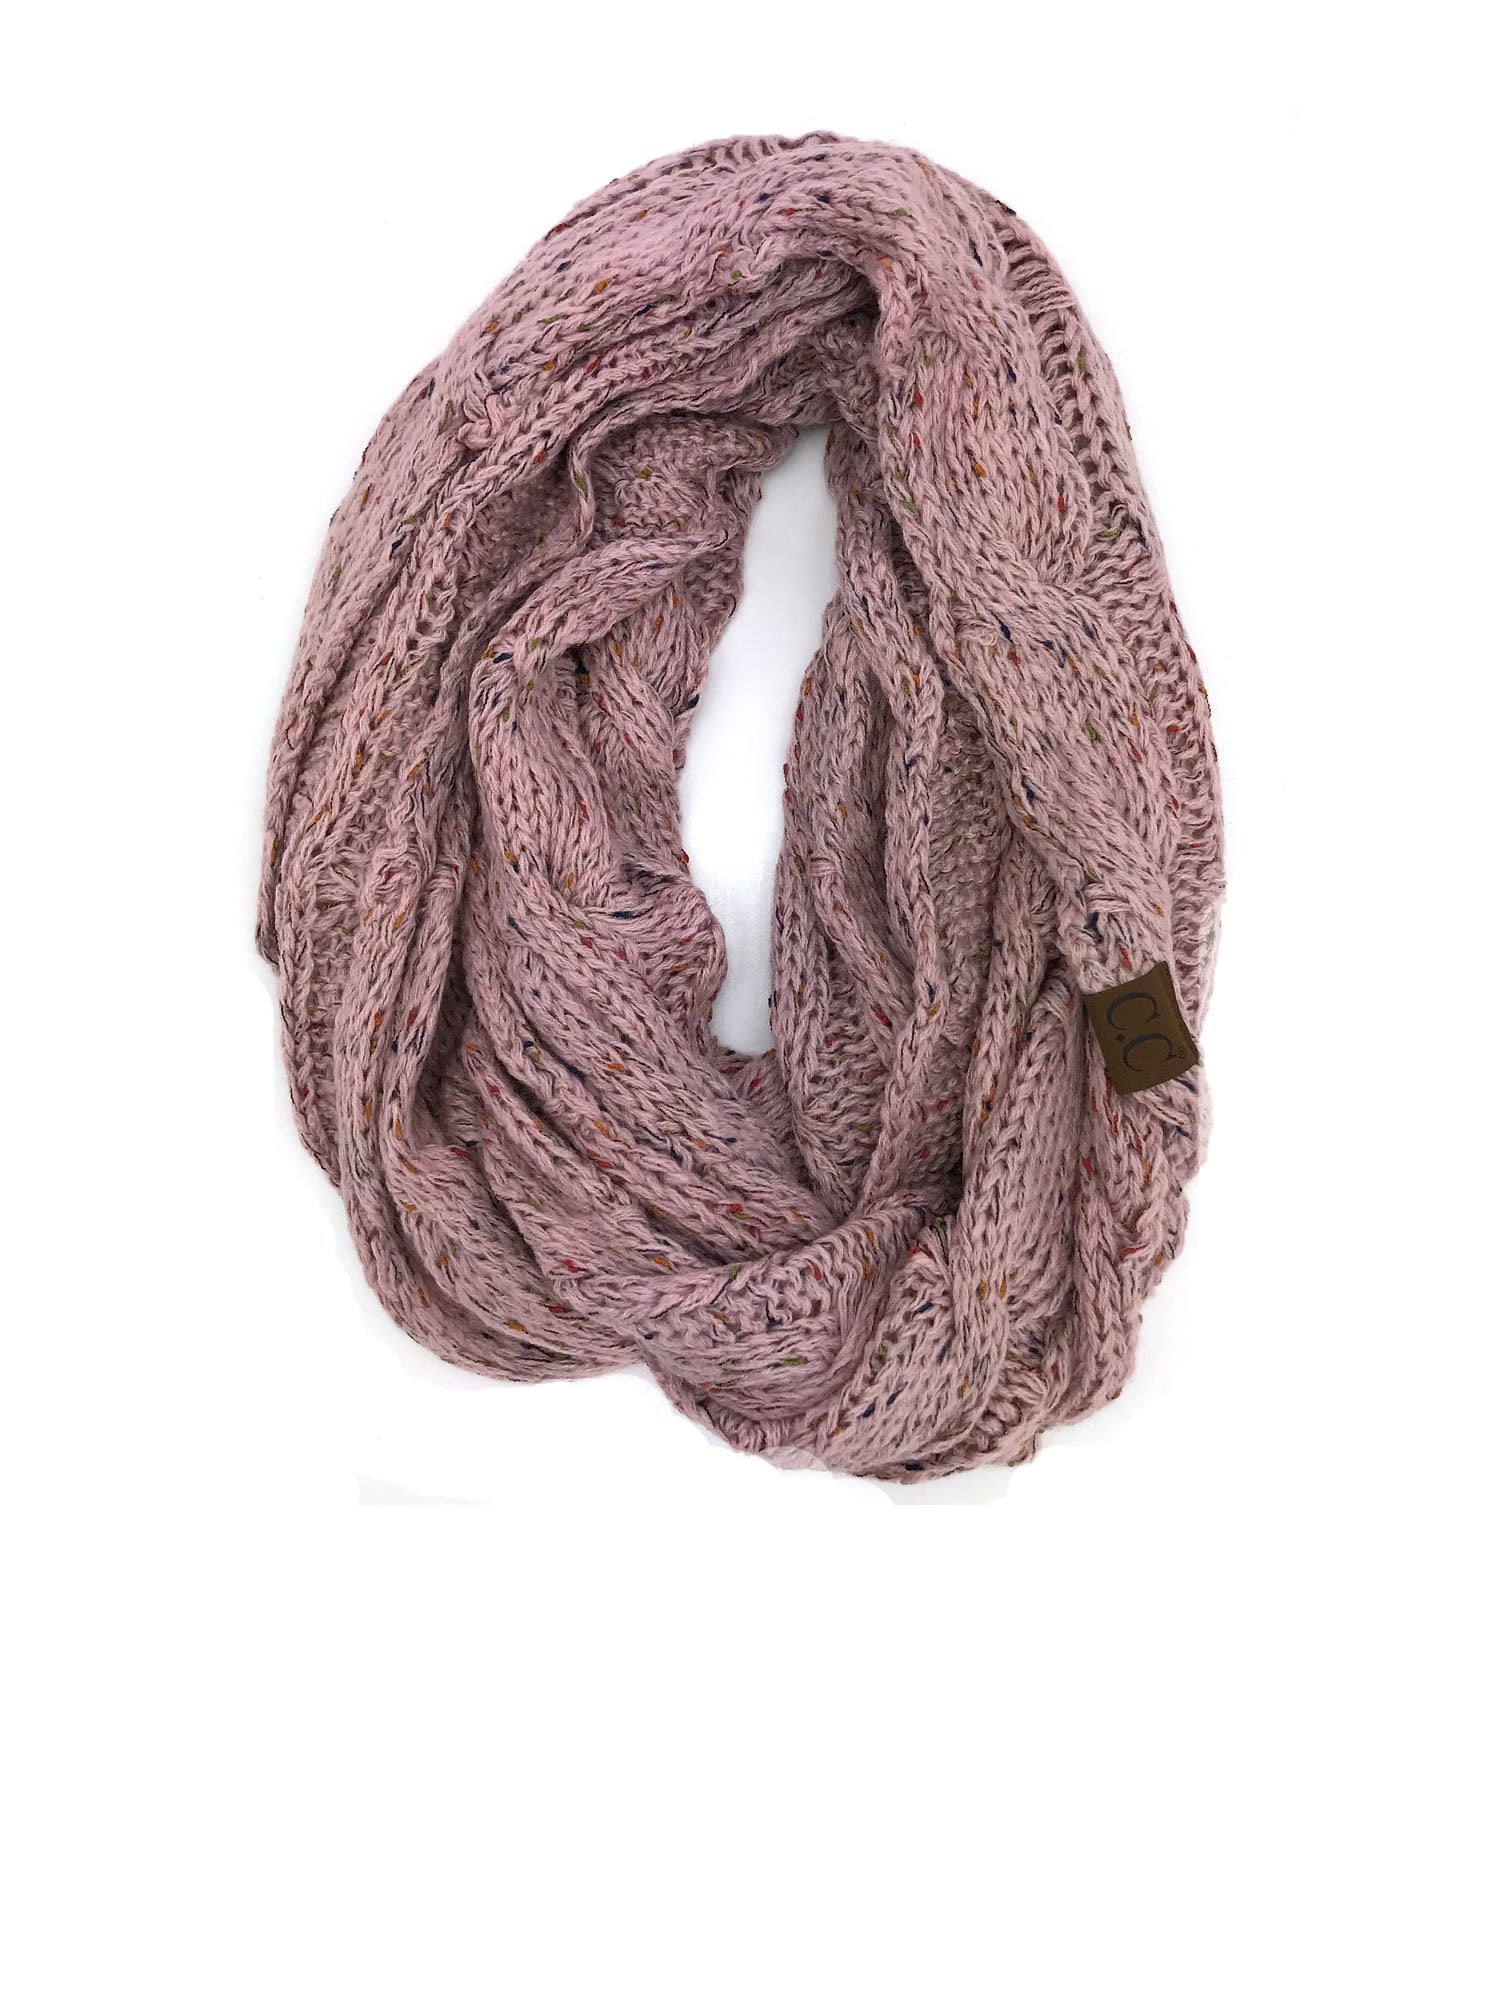 SF33-Indi Pink Speckled Infinity Scarf